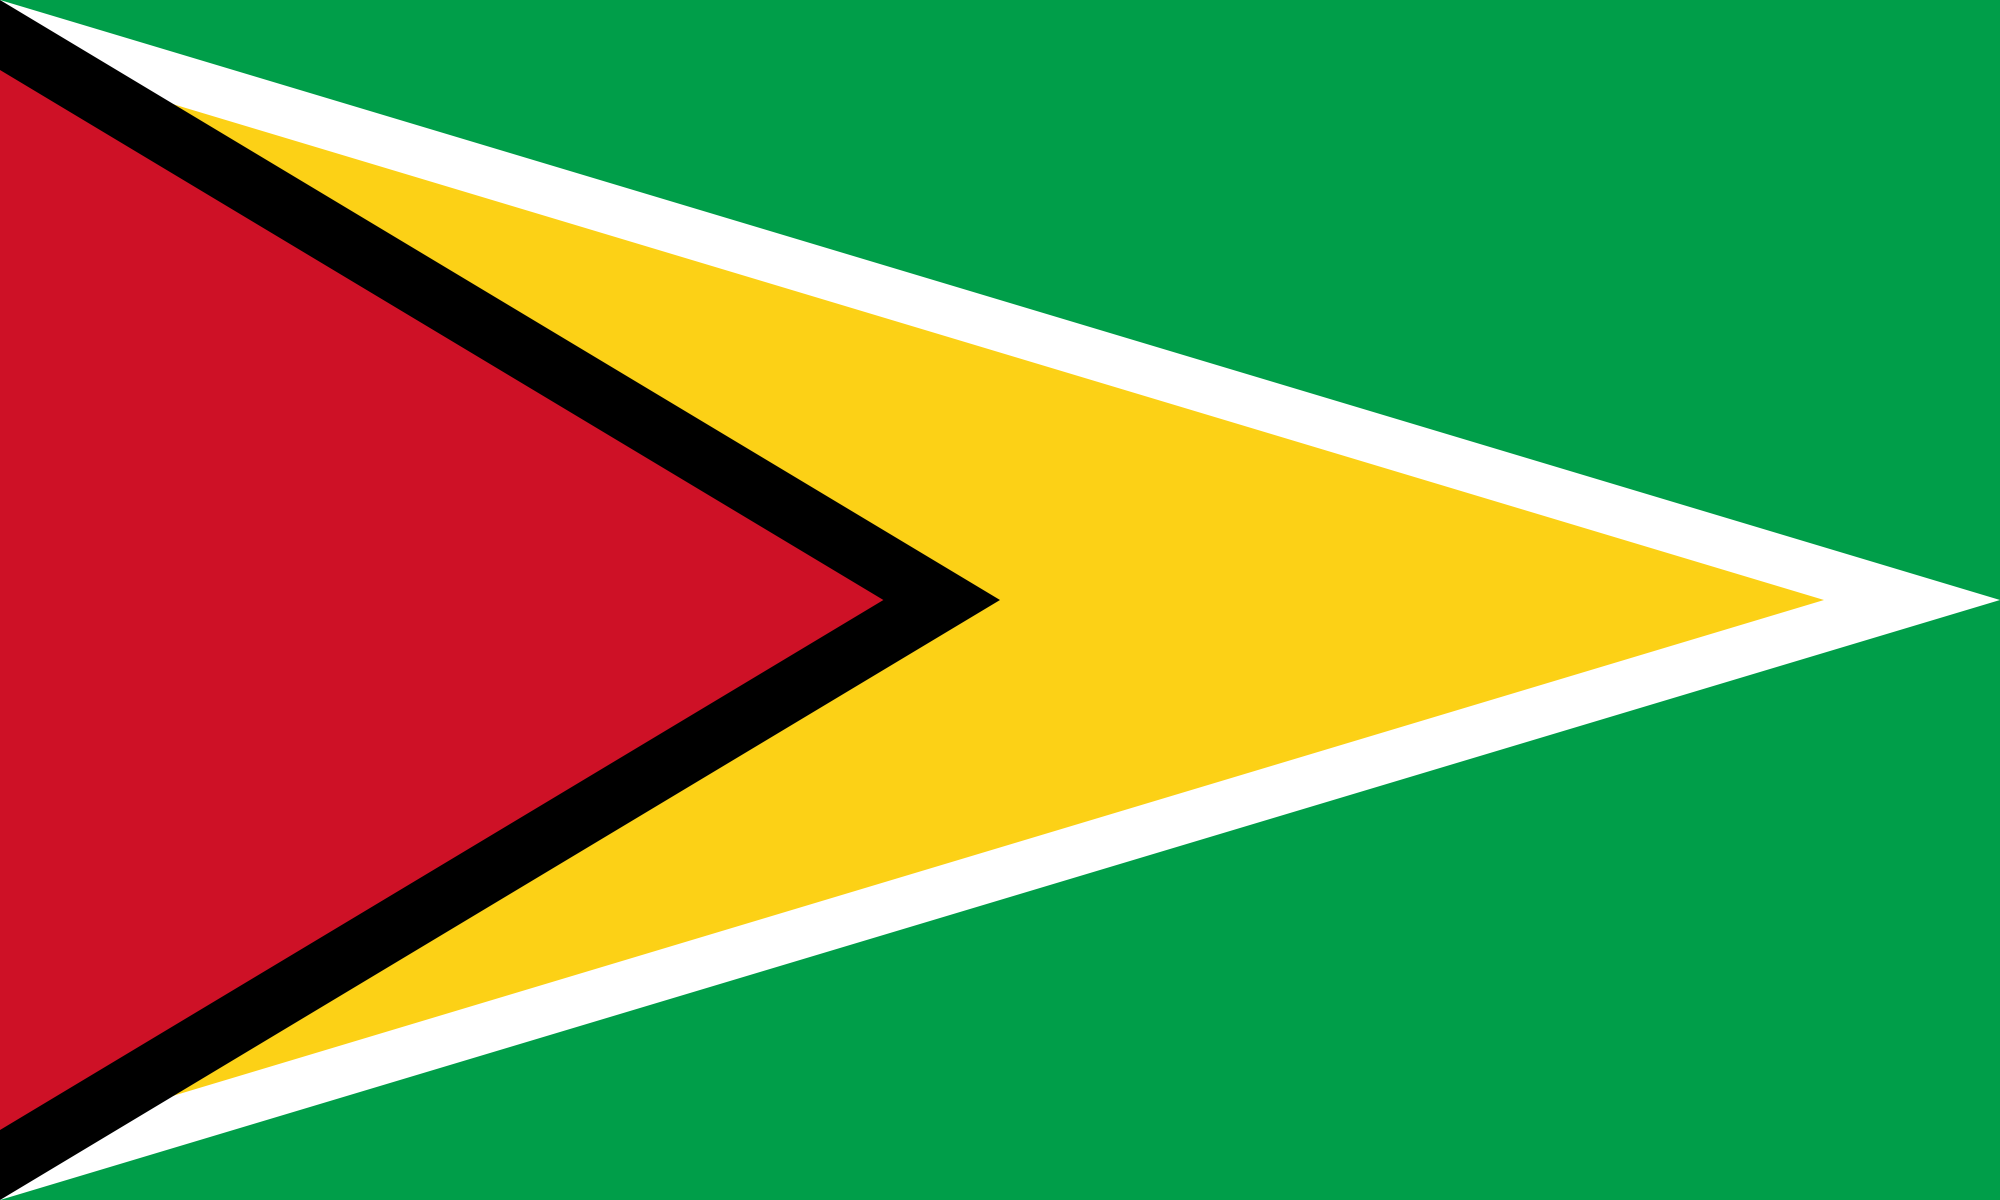 guyana ministry of tourism industry and commerce